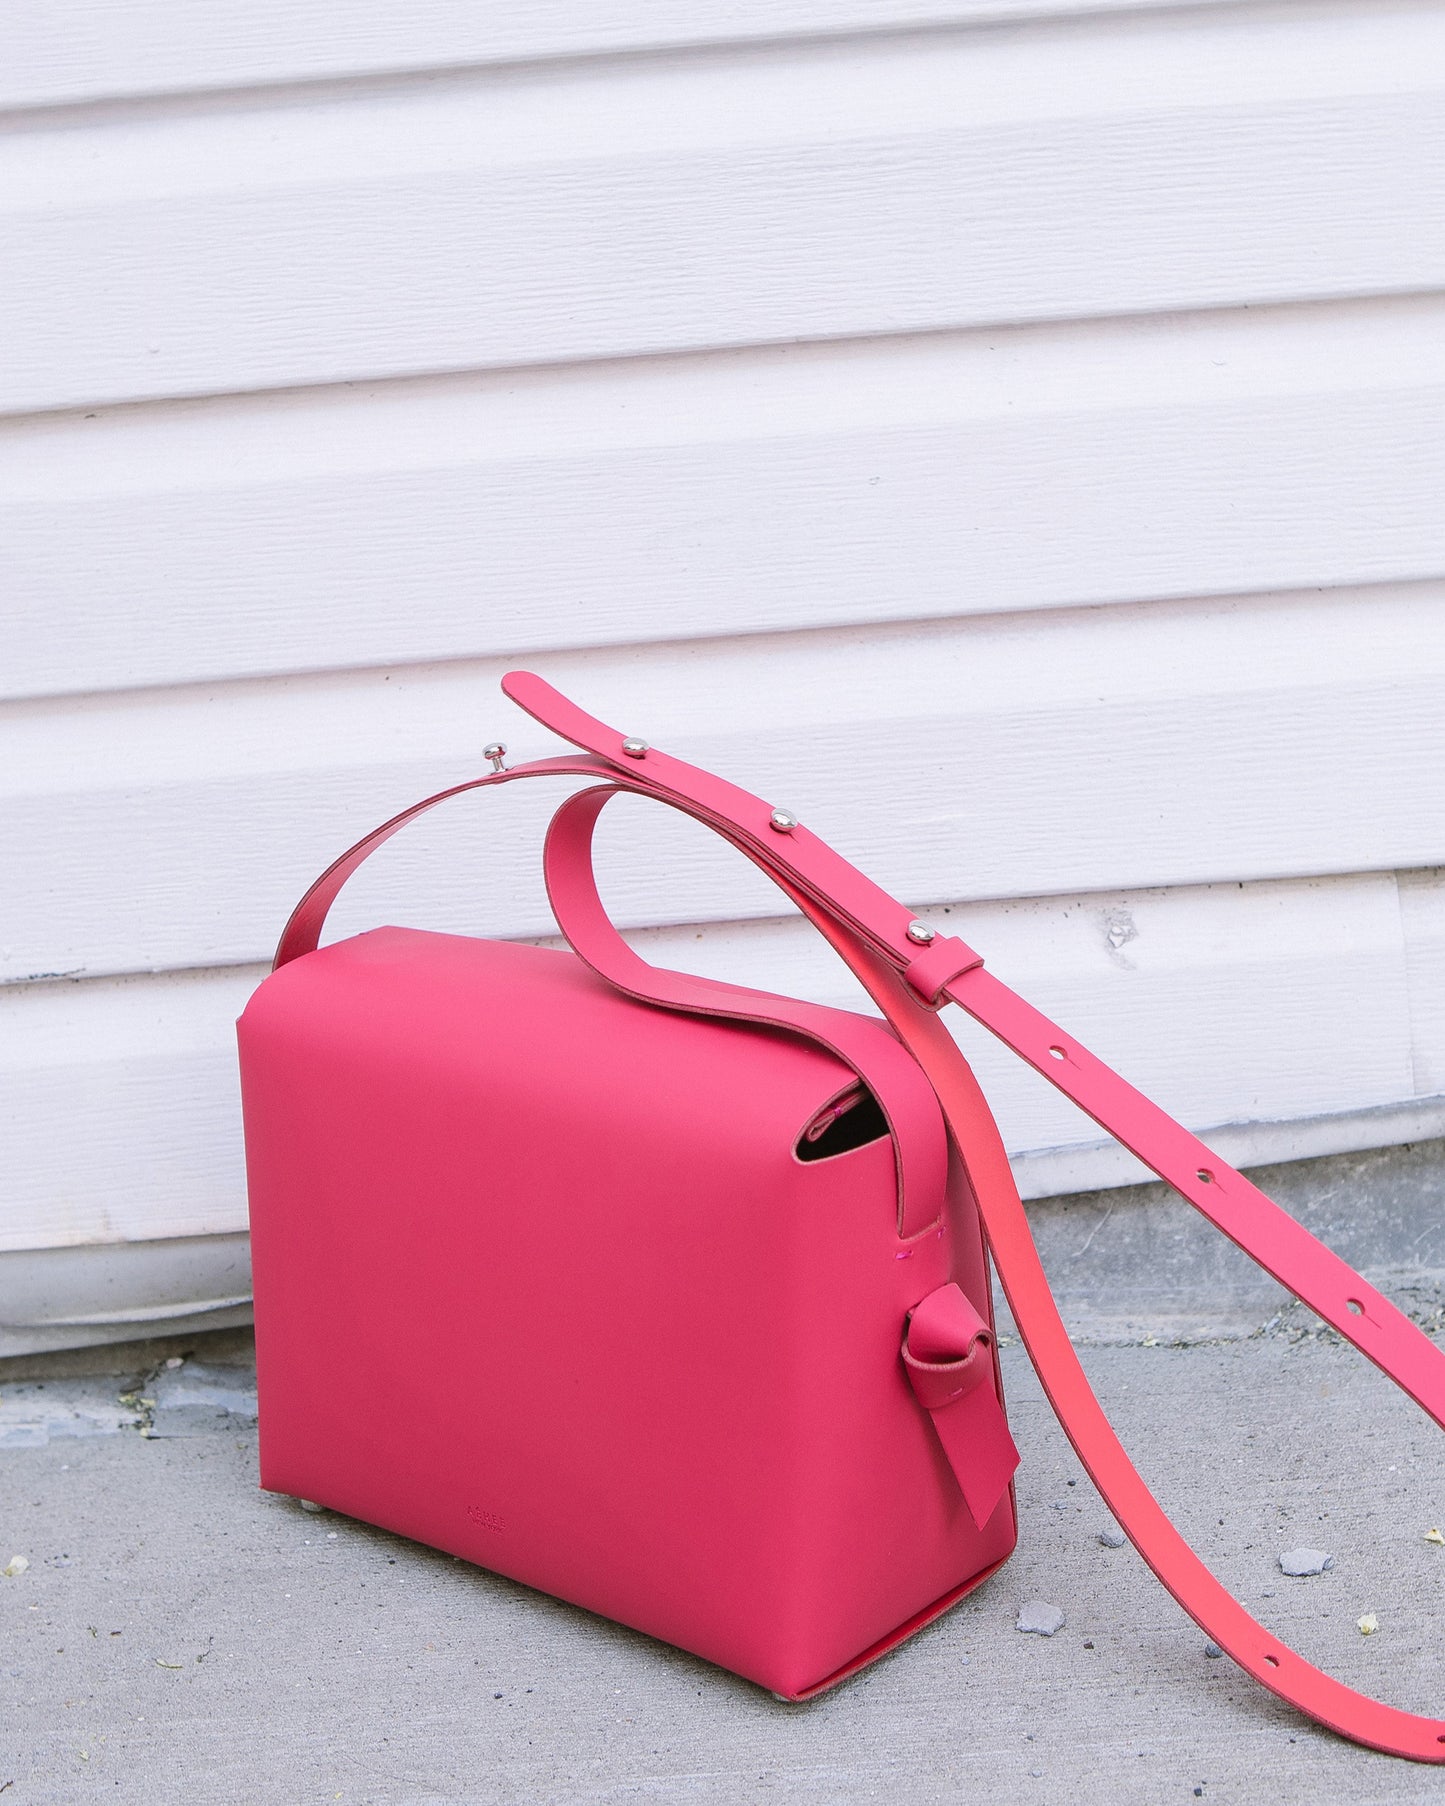 Chic red crossbody bag and shoulder bag with adjustable strap crafted from Italian vegetable tanned leather for a minimal yet sophisticated look.